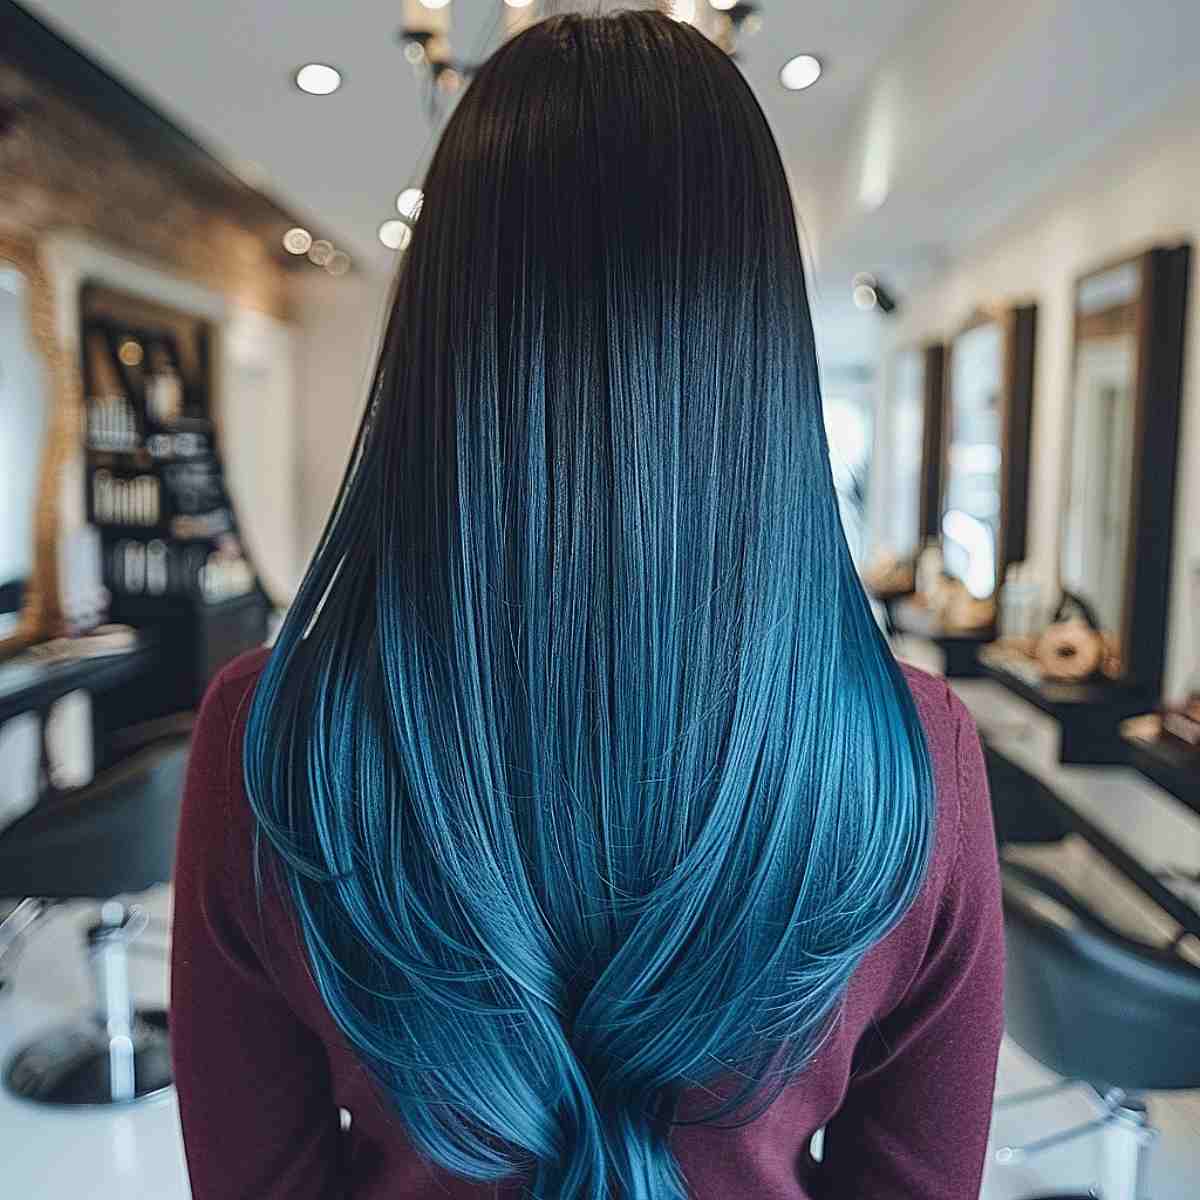 Black to Blue Ombre